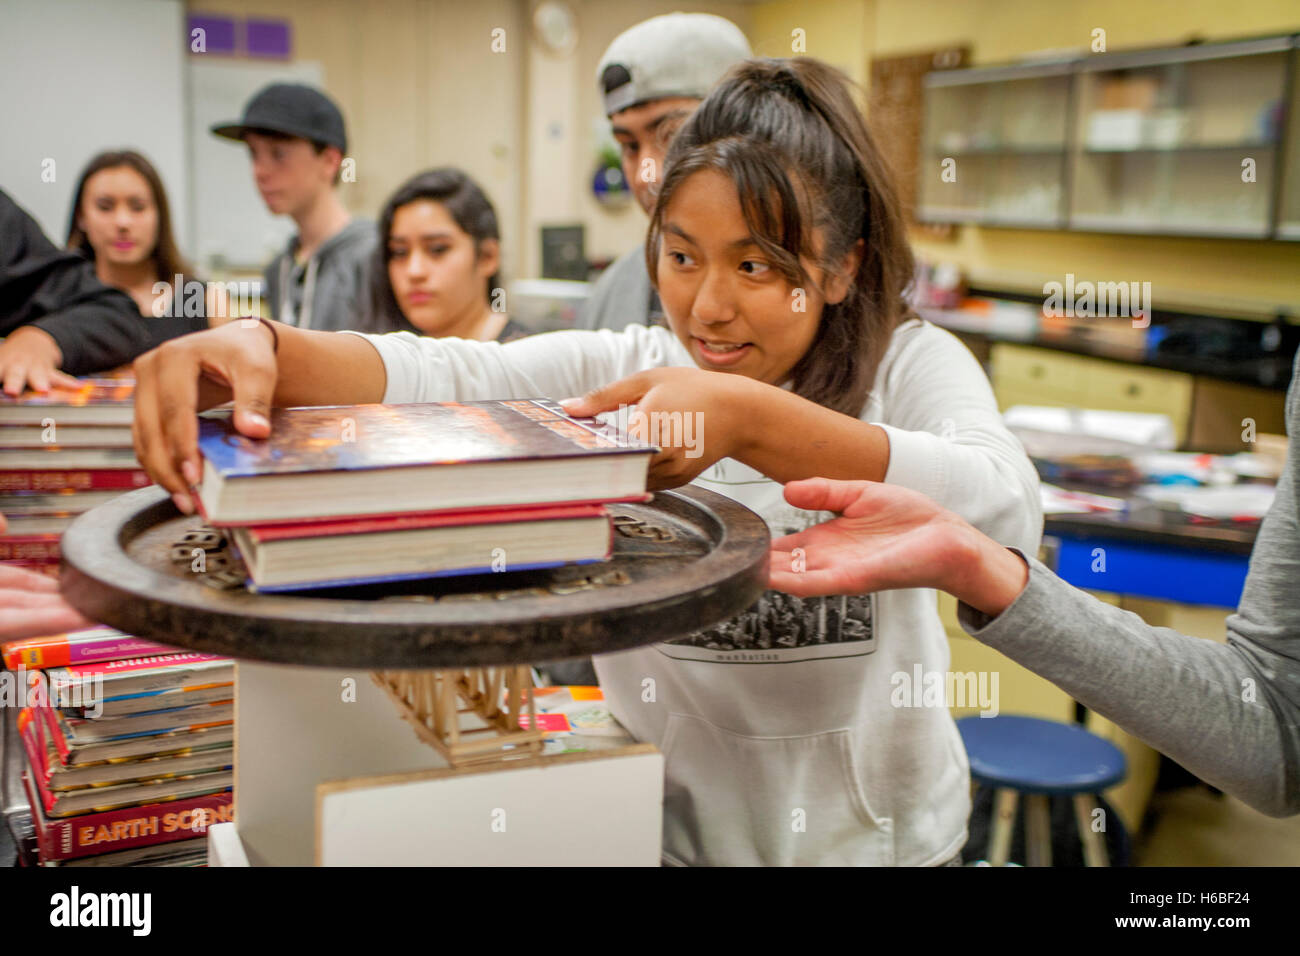 https://c8.alamy.com/comp/H6BF24/a-hispanic-high-school-student-in-mission-viejo-ca-stacks-weights-H6BF24.jpg